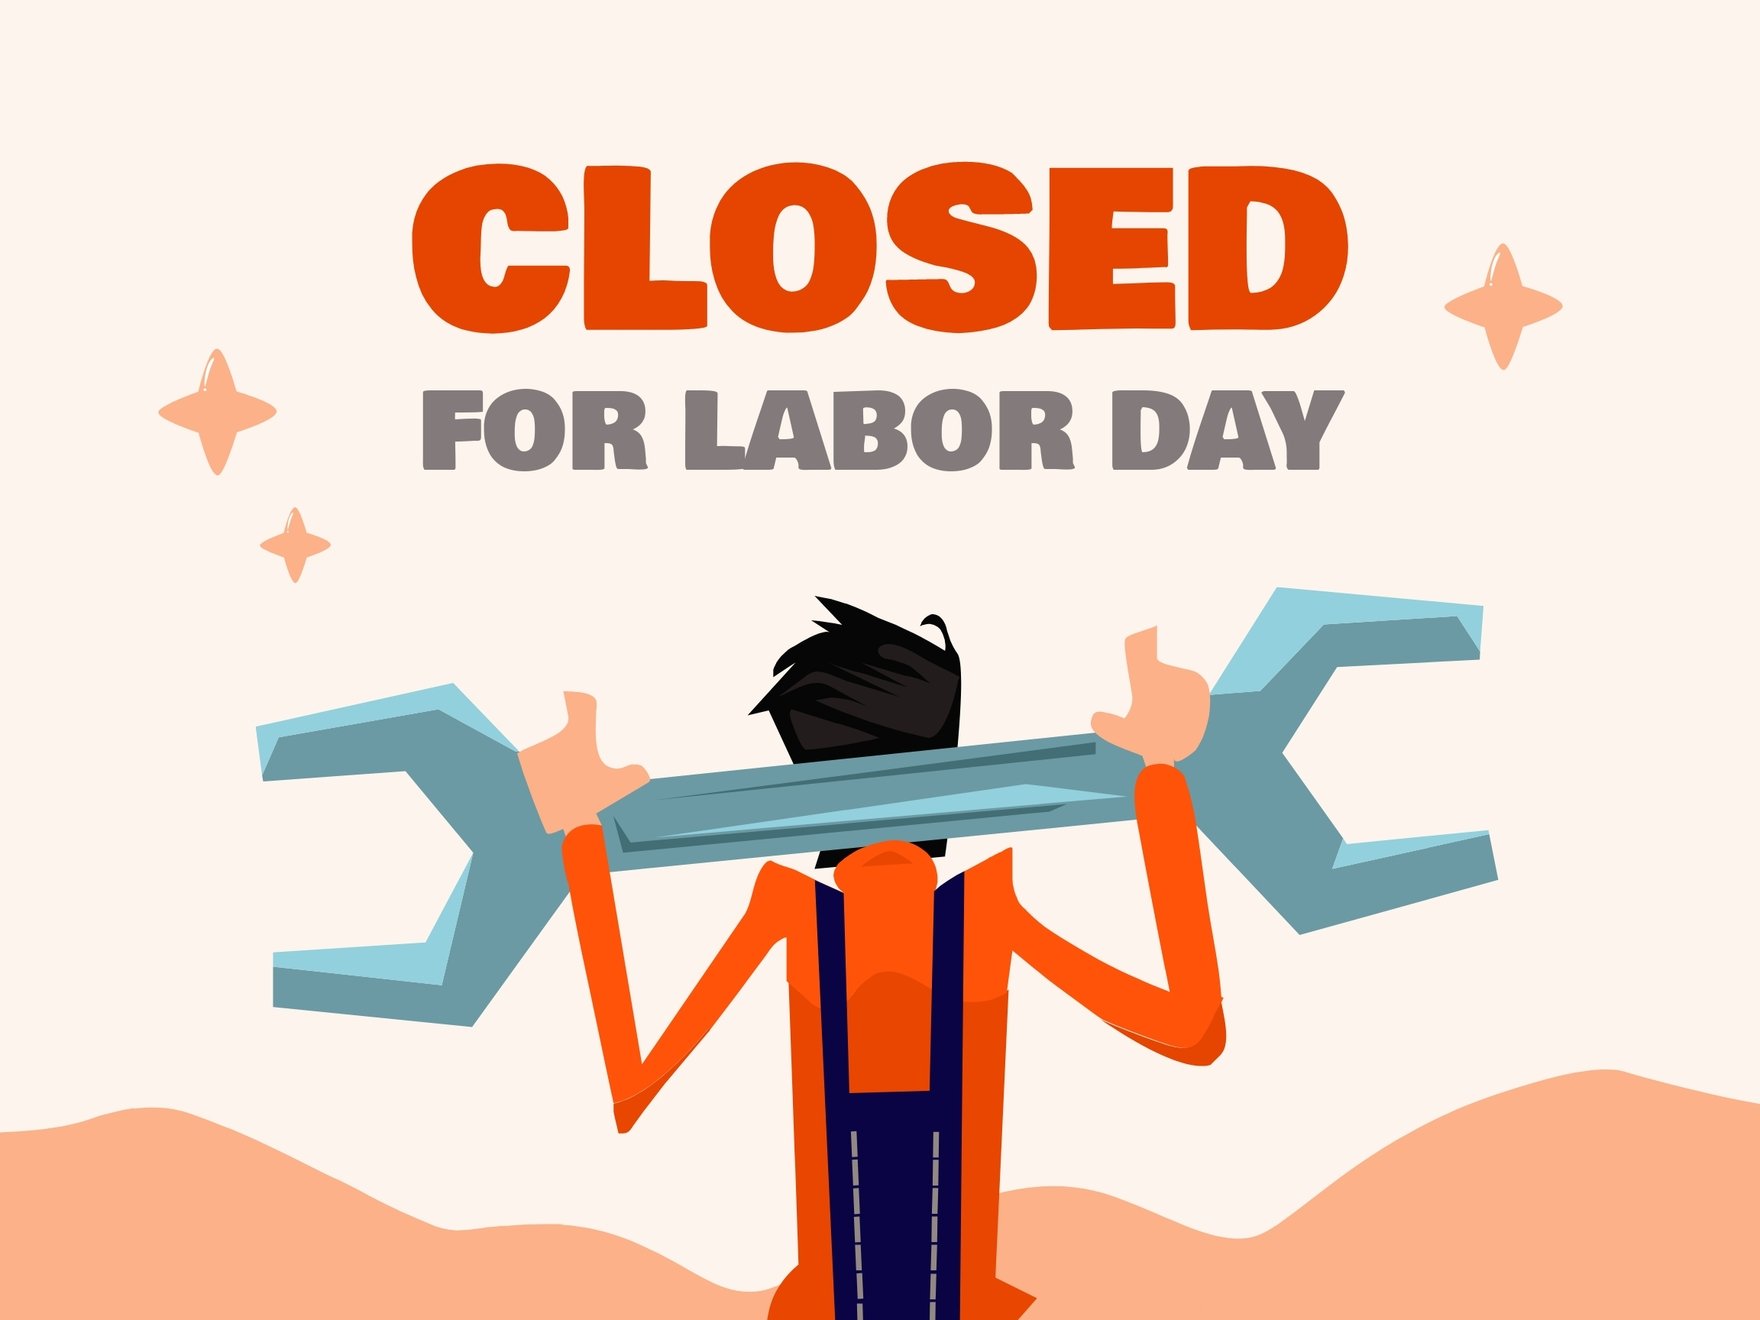 free-closing-for-labor-day-sign-download-in-png-jpg-template